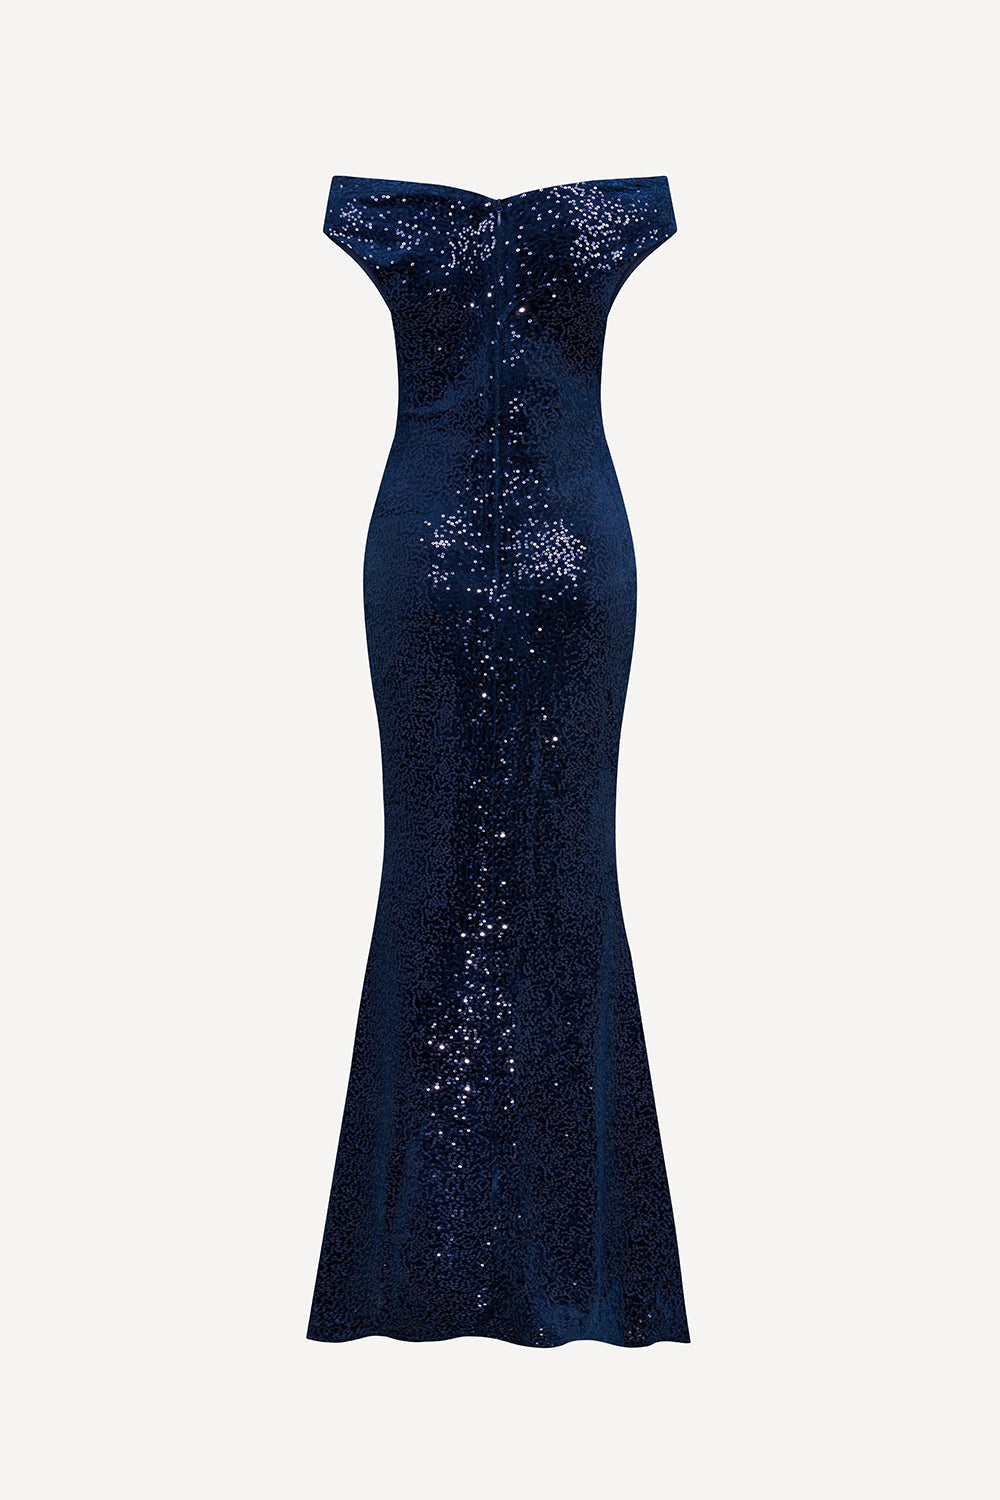 Femme totale sequin gown in midnight